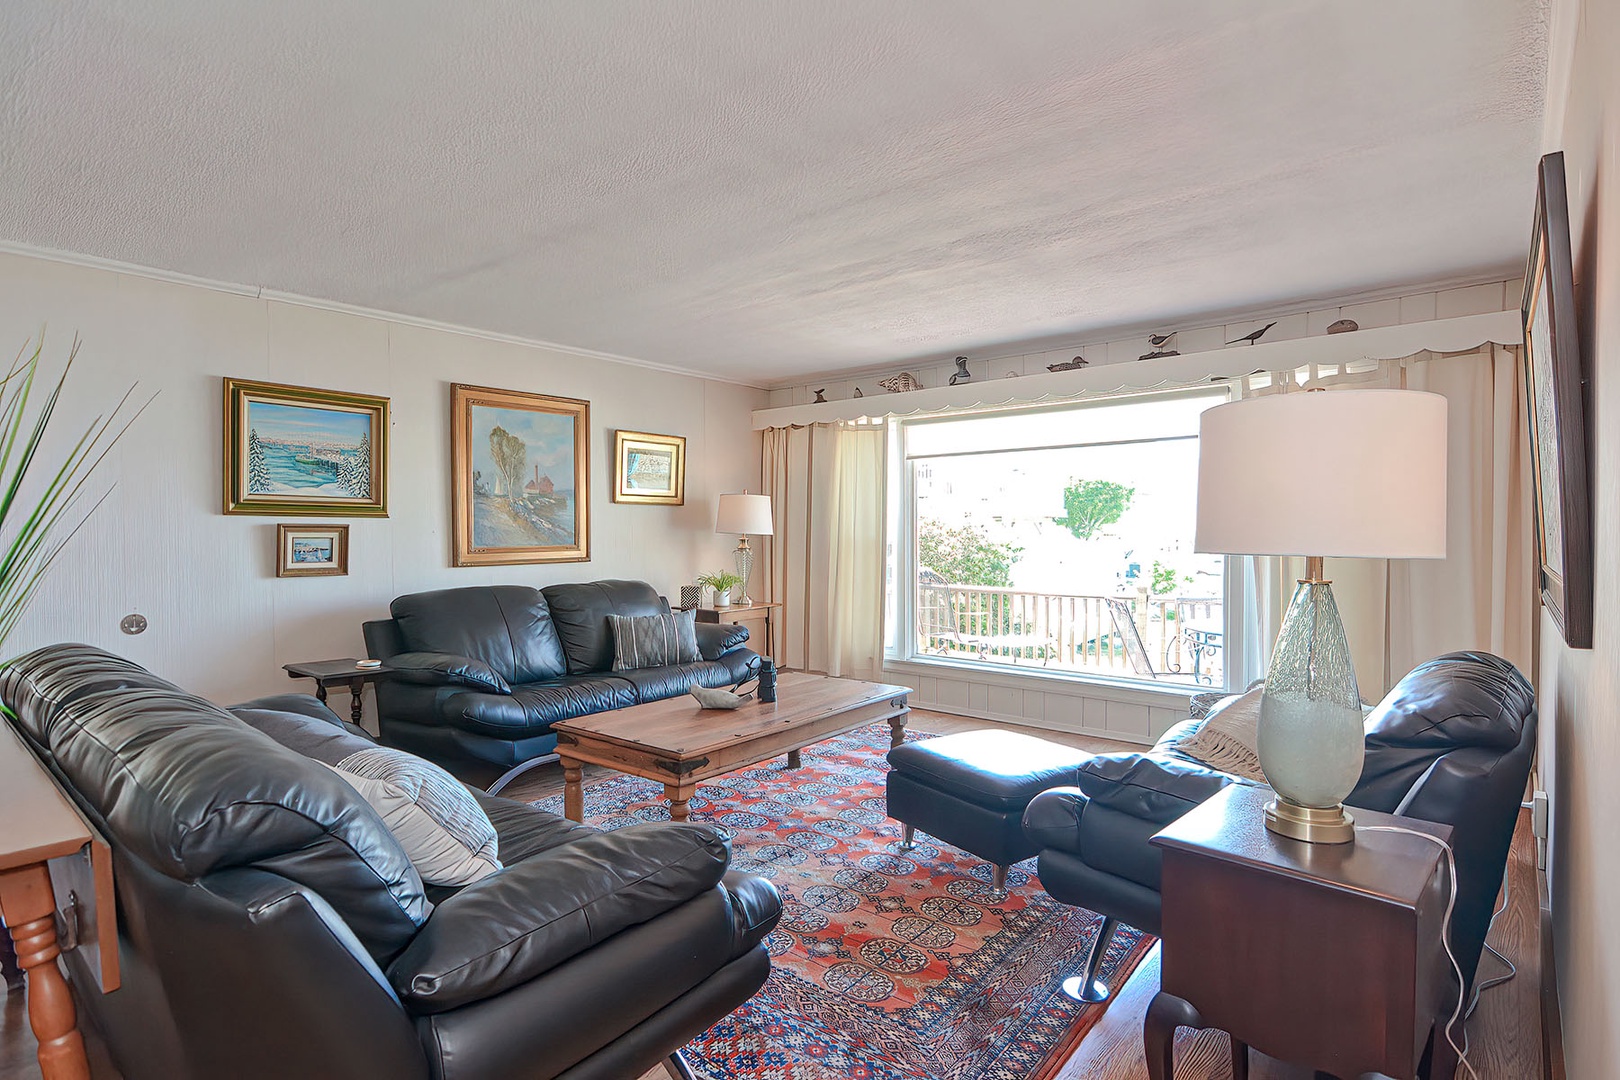 The large living room has comfortable seating and a water view.